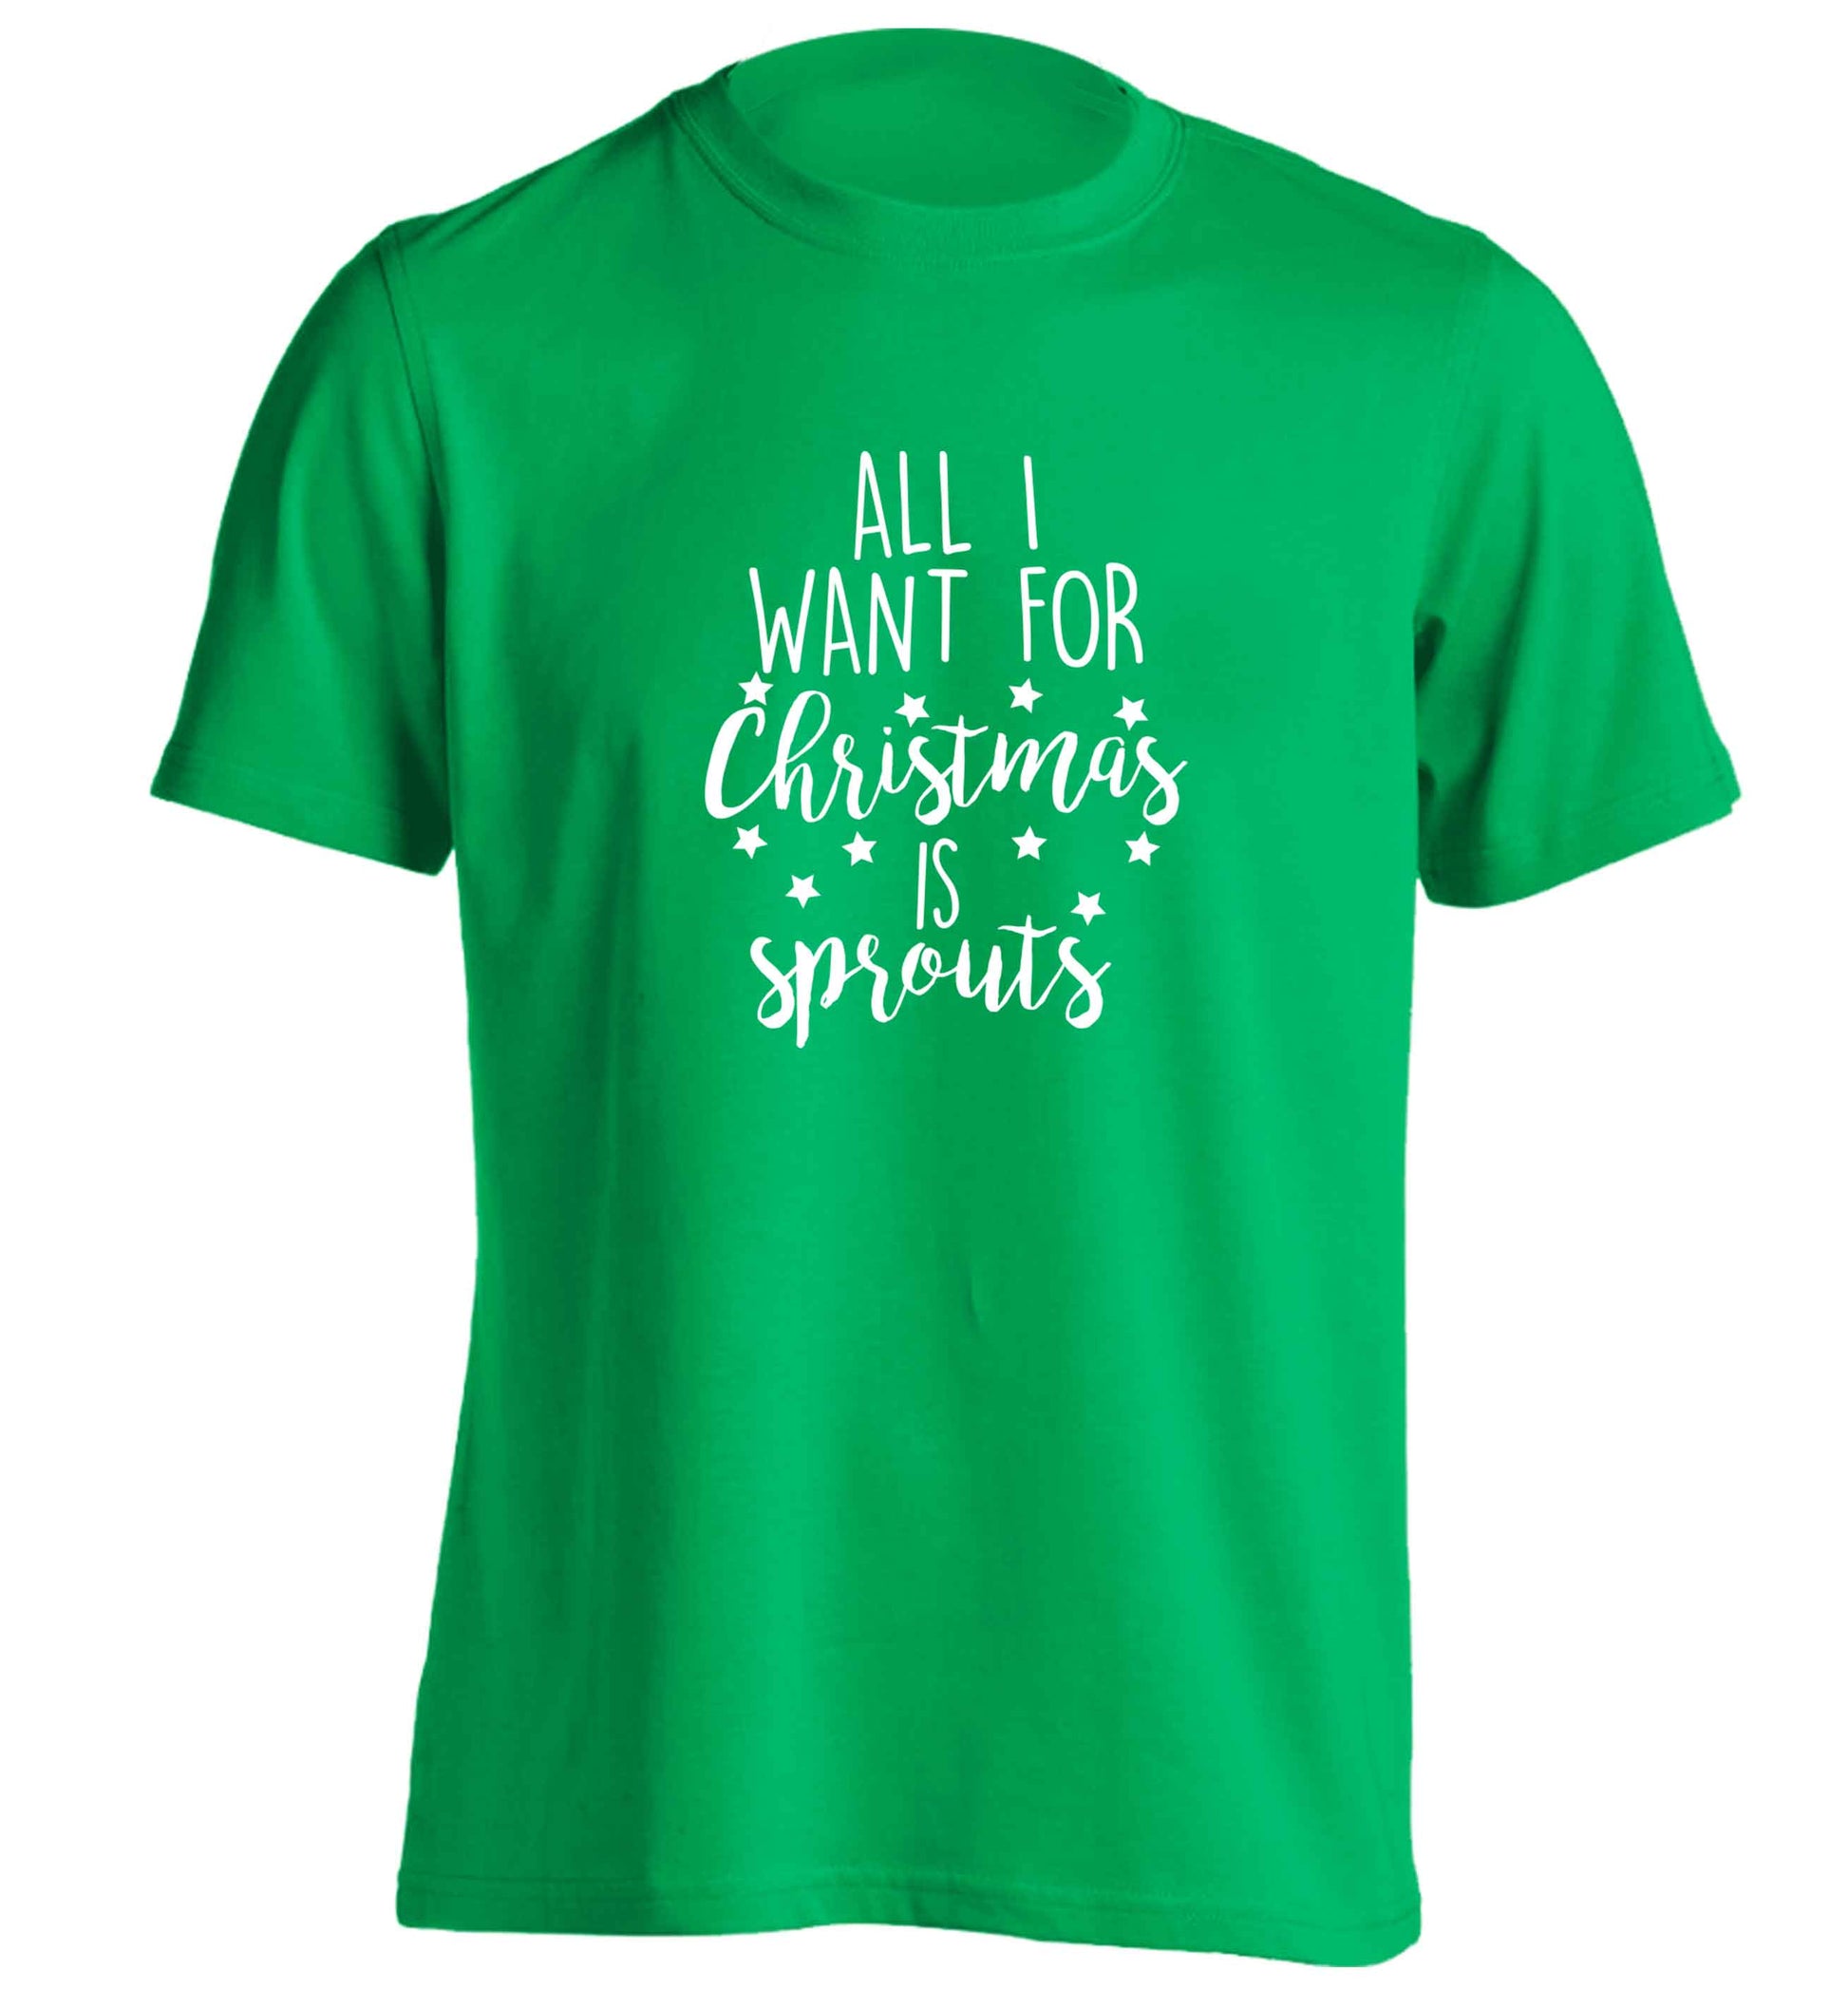 All I want for Christmas is sprouts adults unisex green Tshirt 2XL